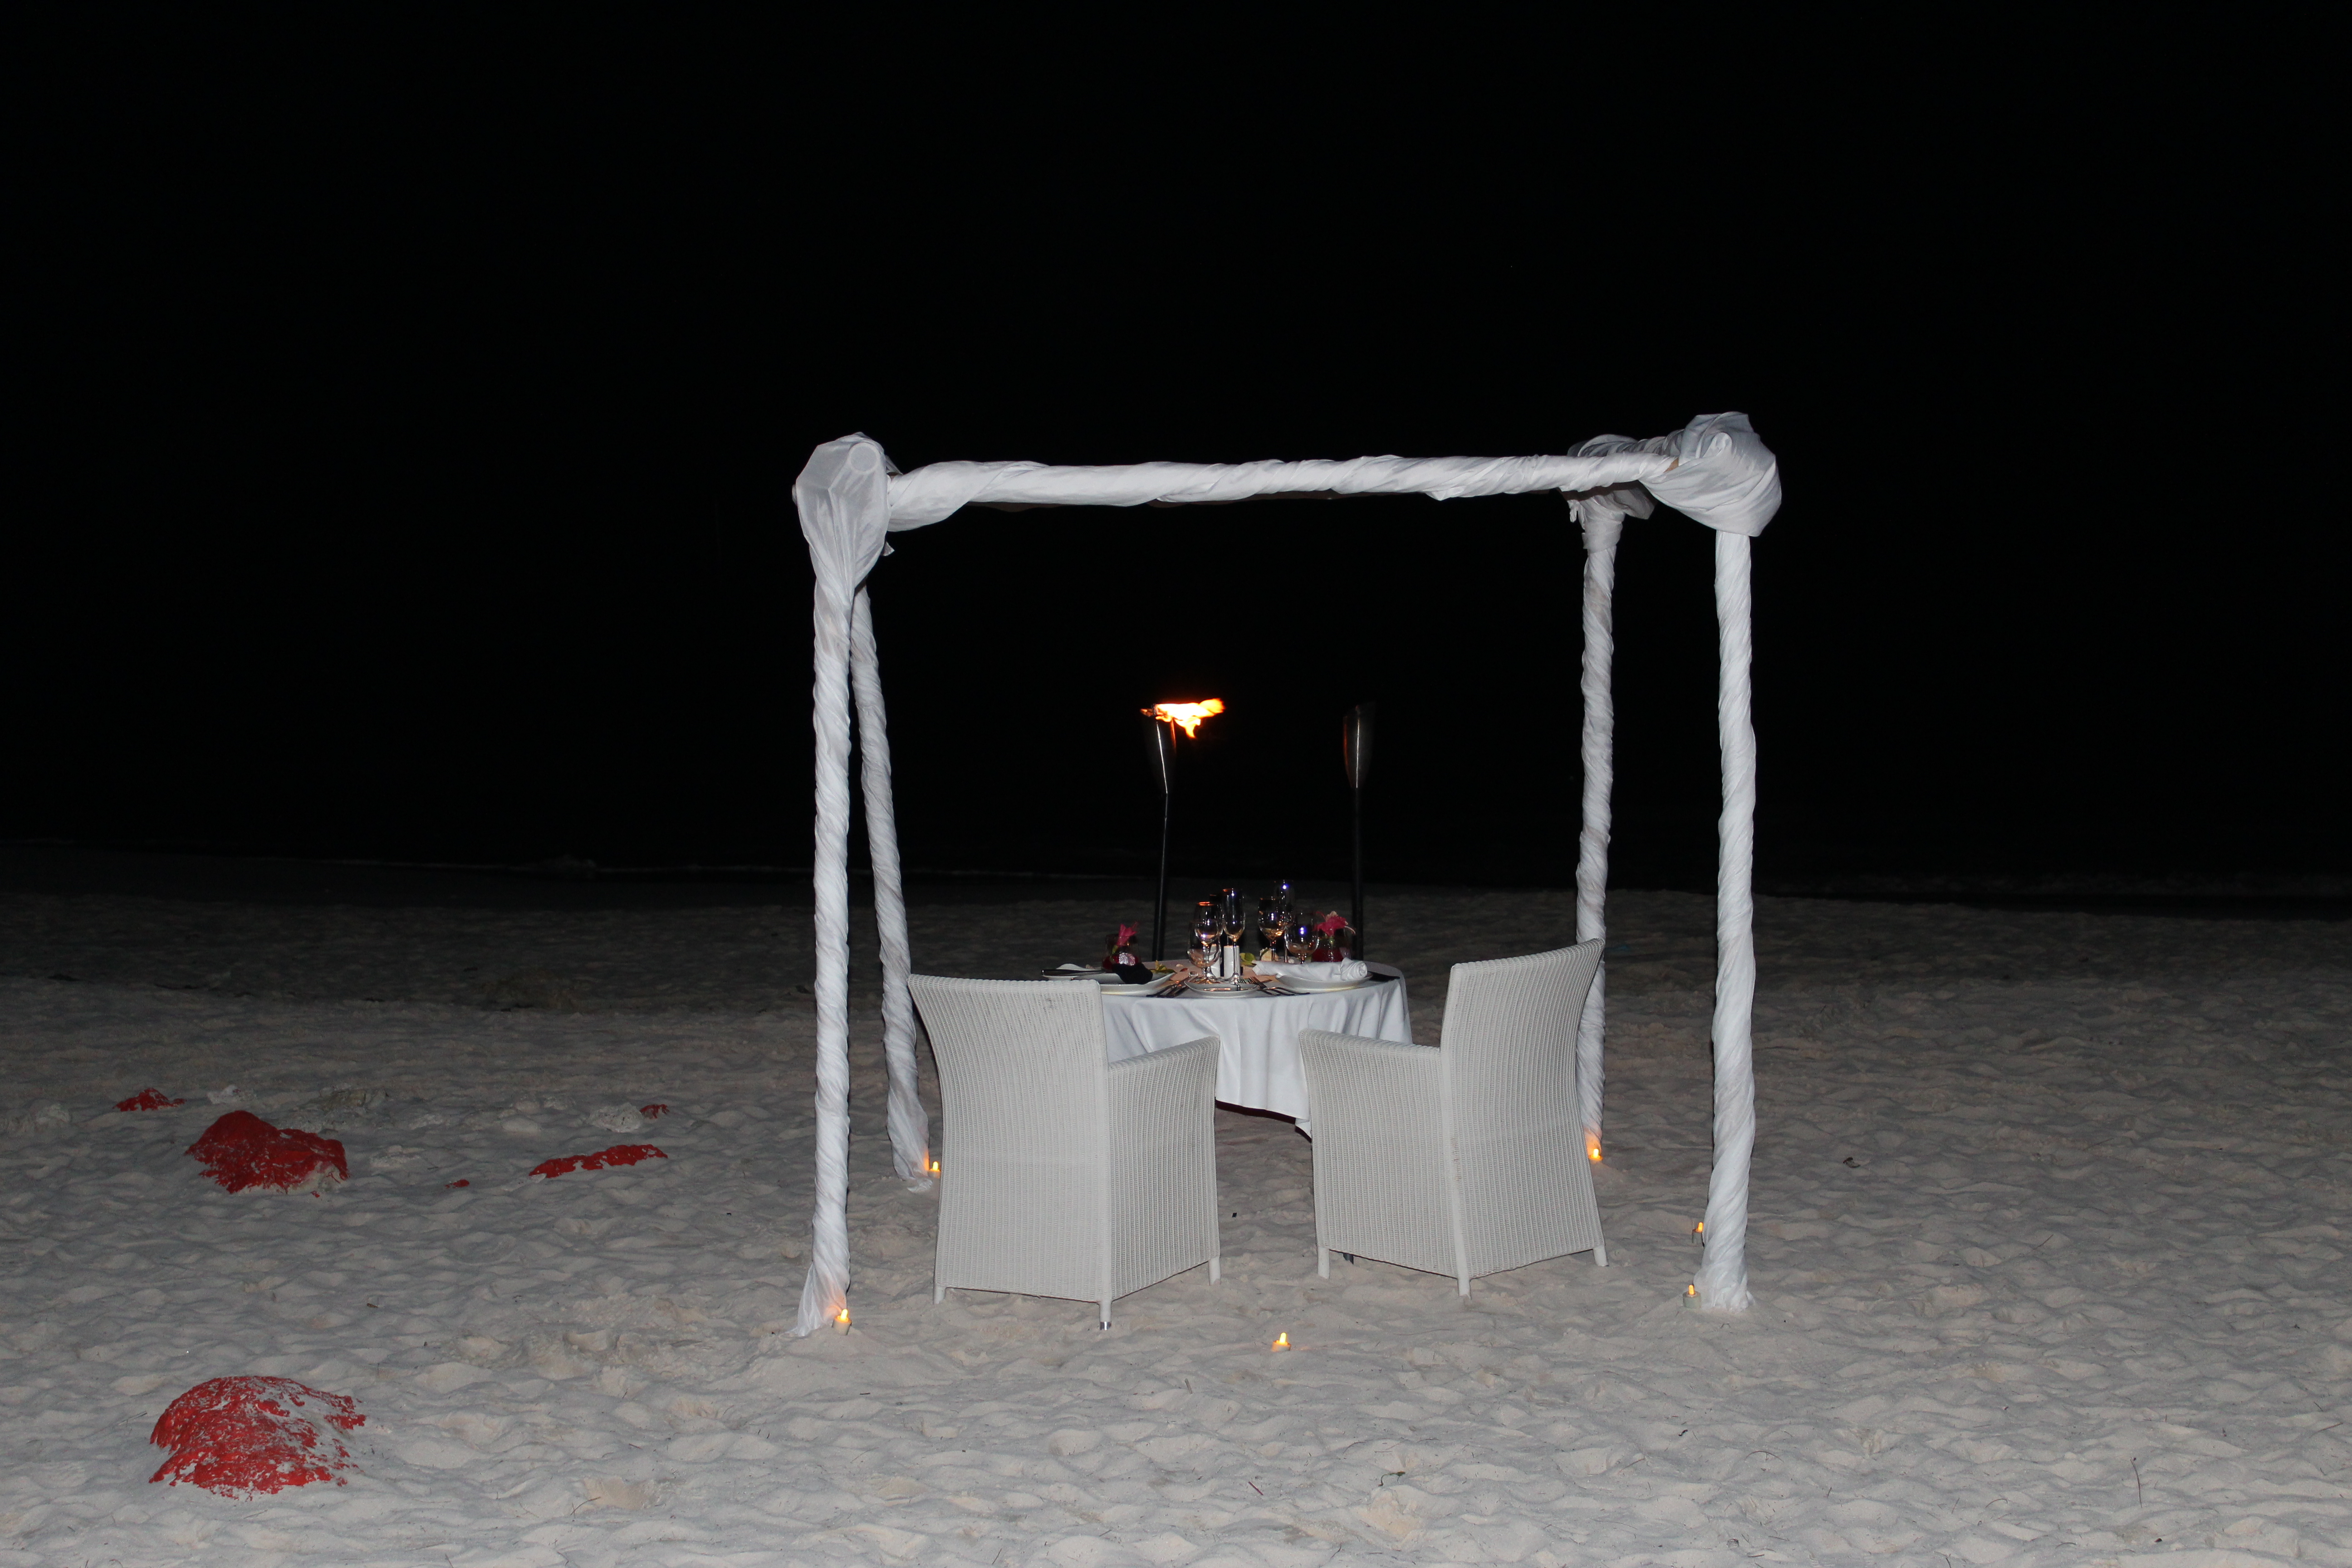 Dining on the Beach at Sandals Barbados